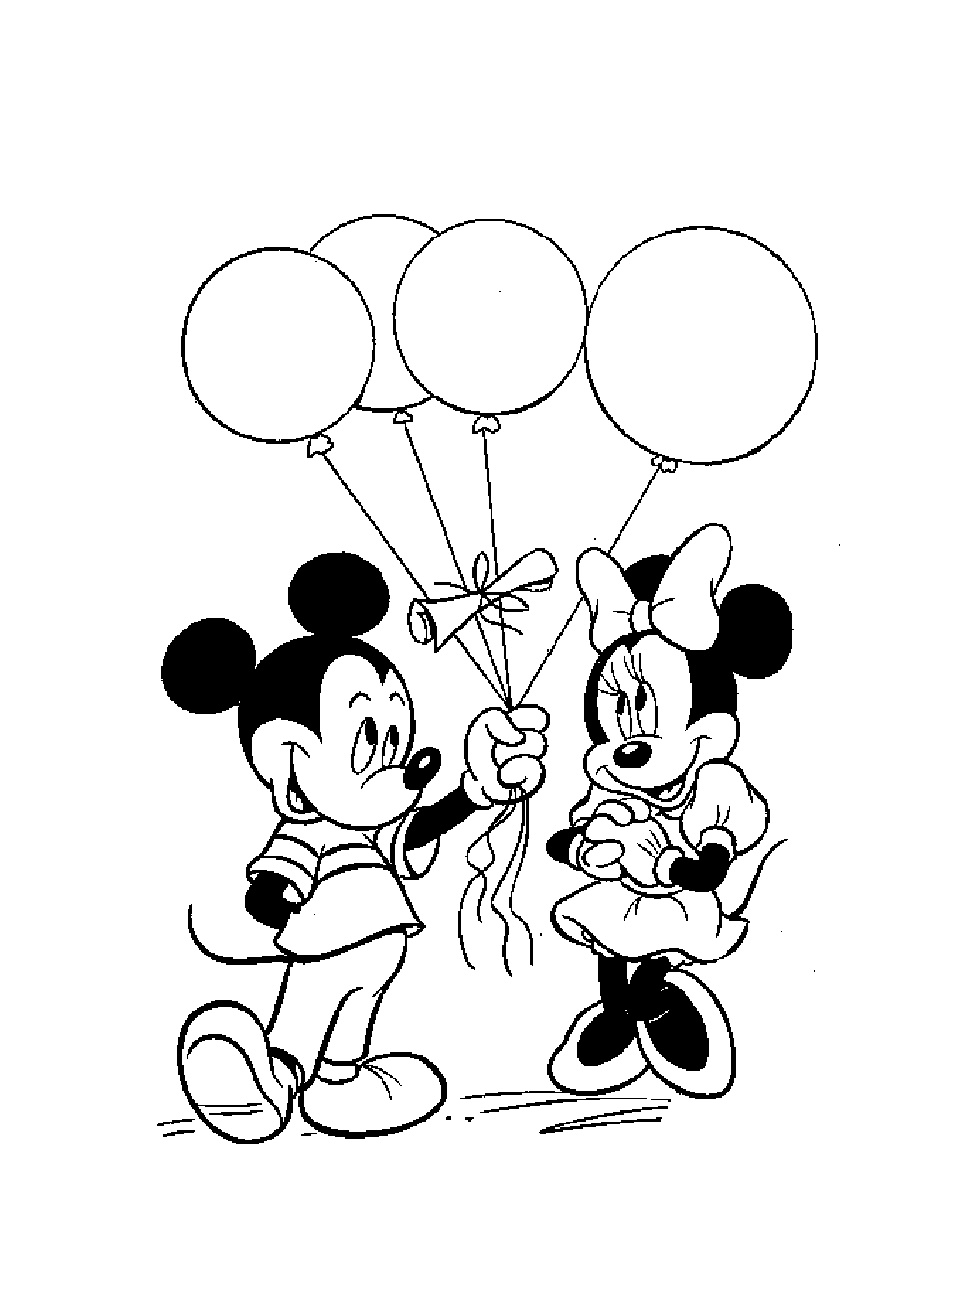 image=mickey et ses amis coloriage mickey minnie ballons 2